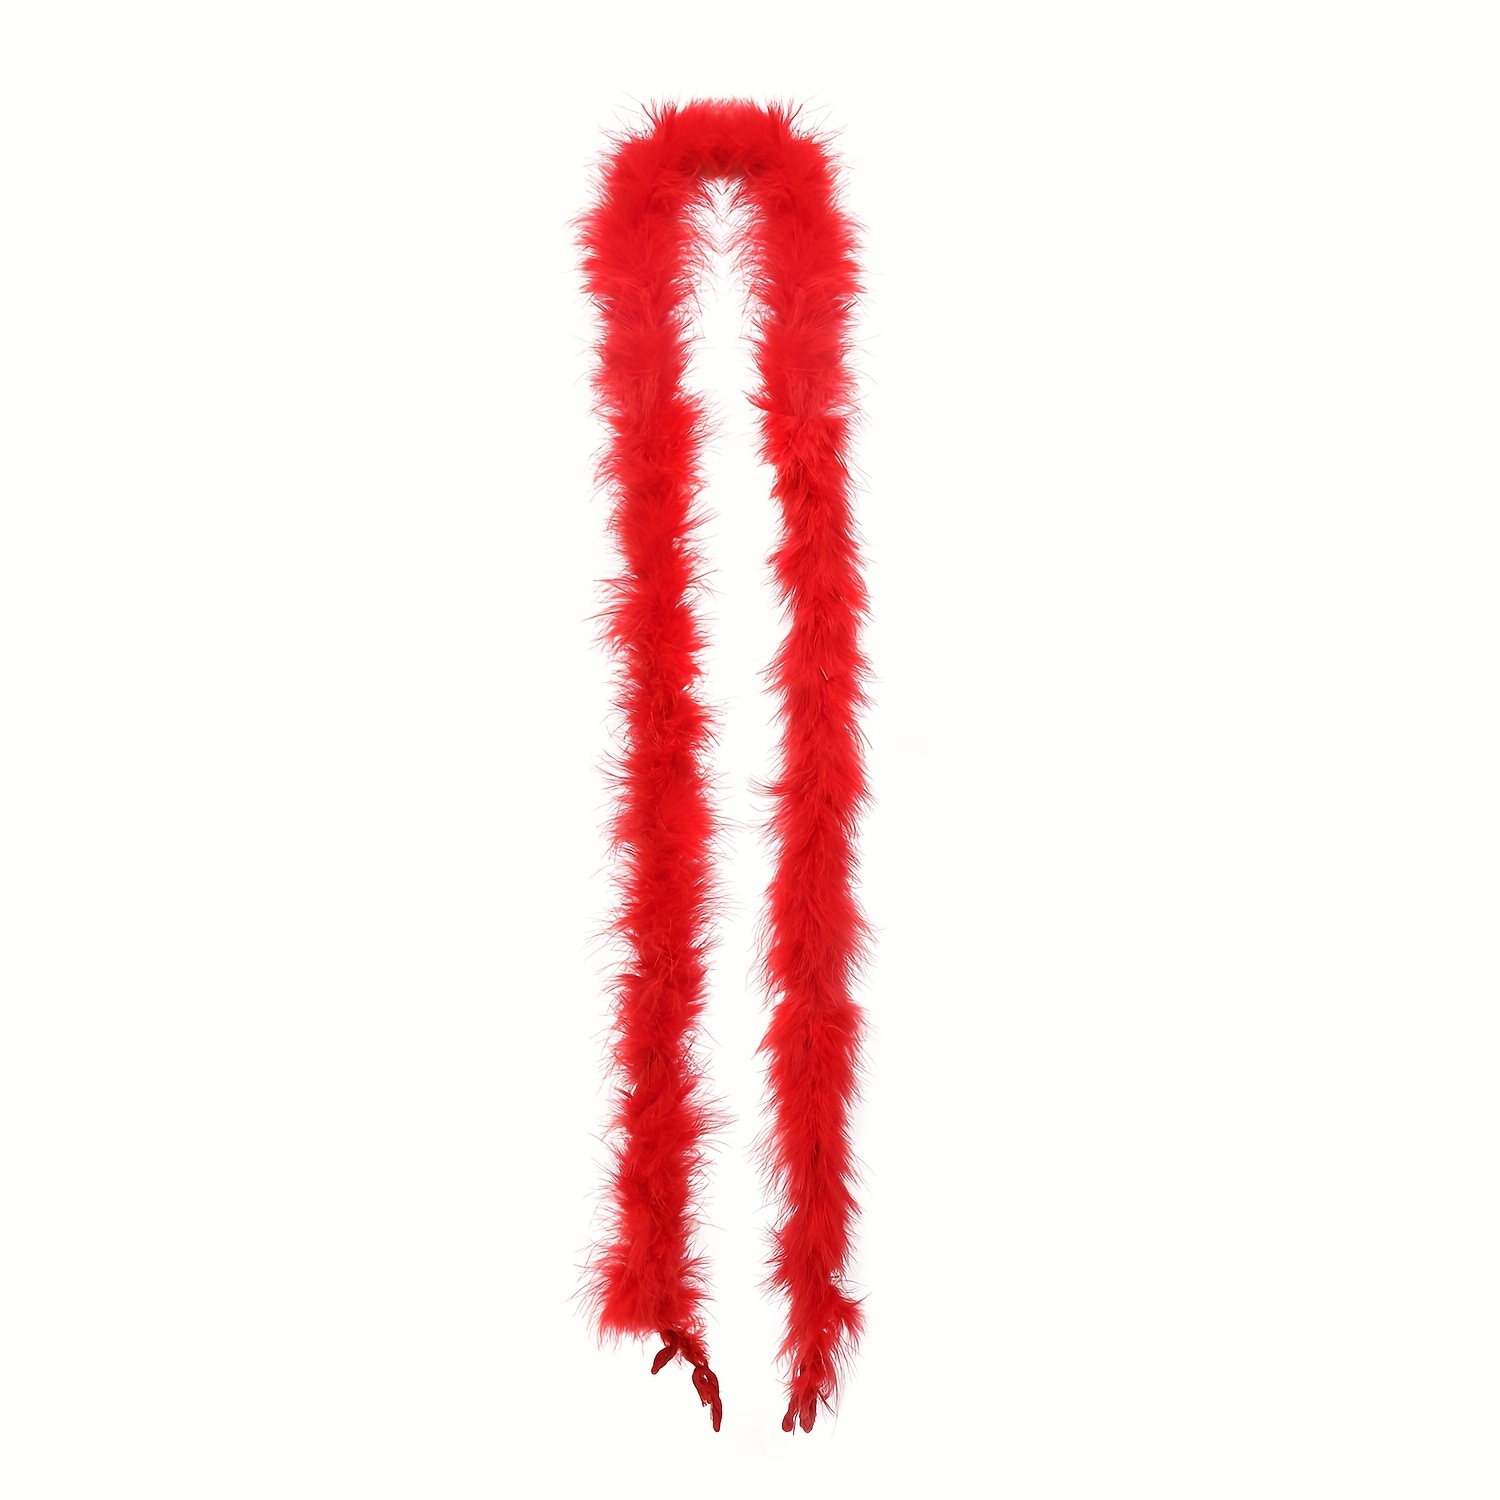 HaiMay 2 Pack Turkey Feather Boa for Craft Clothes Accessories Latin  Wedding Dress Home Party Costumes Decoration, 4.4 Yards 40G Red Feather Boas